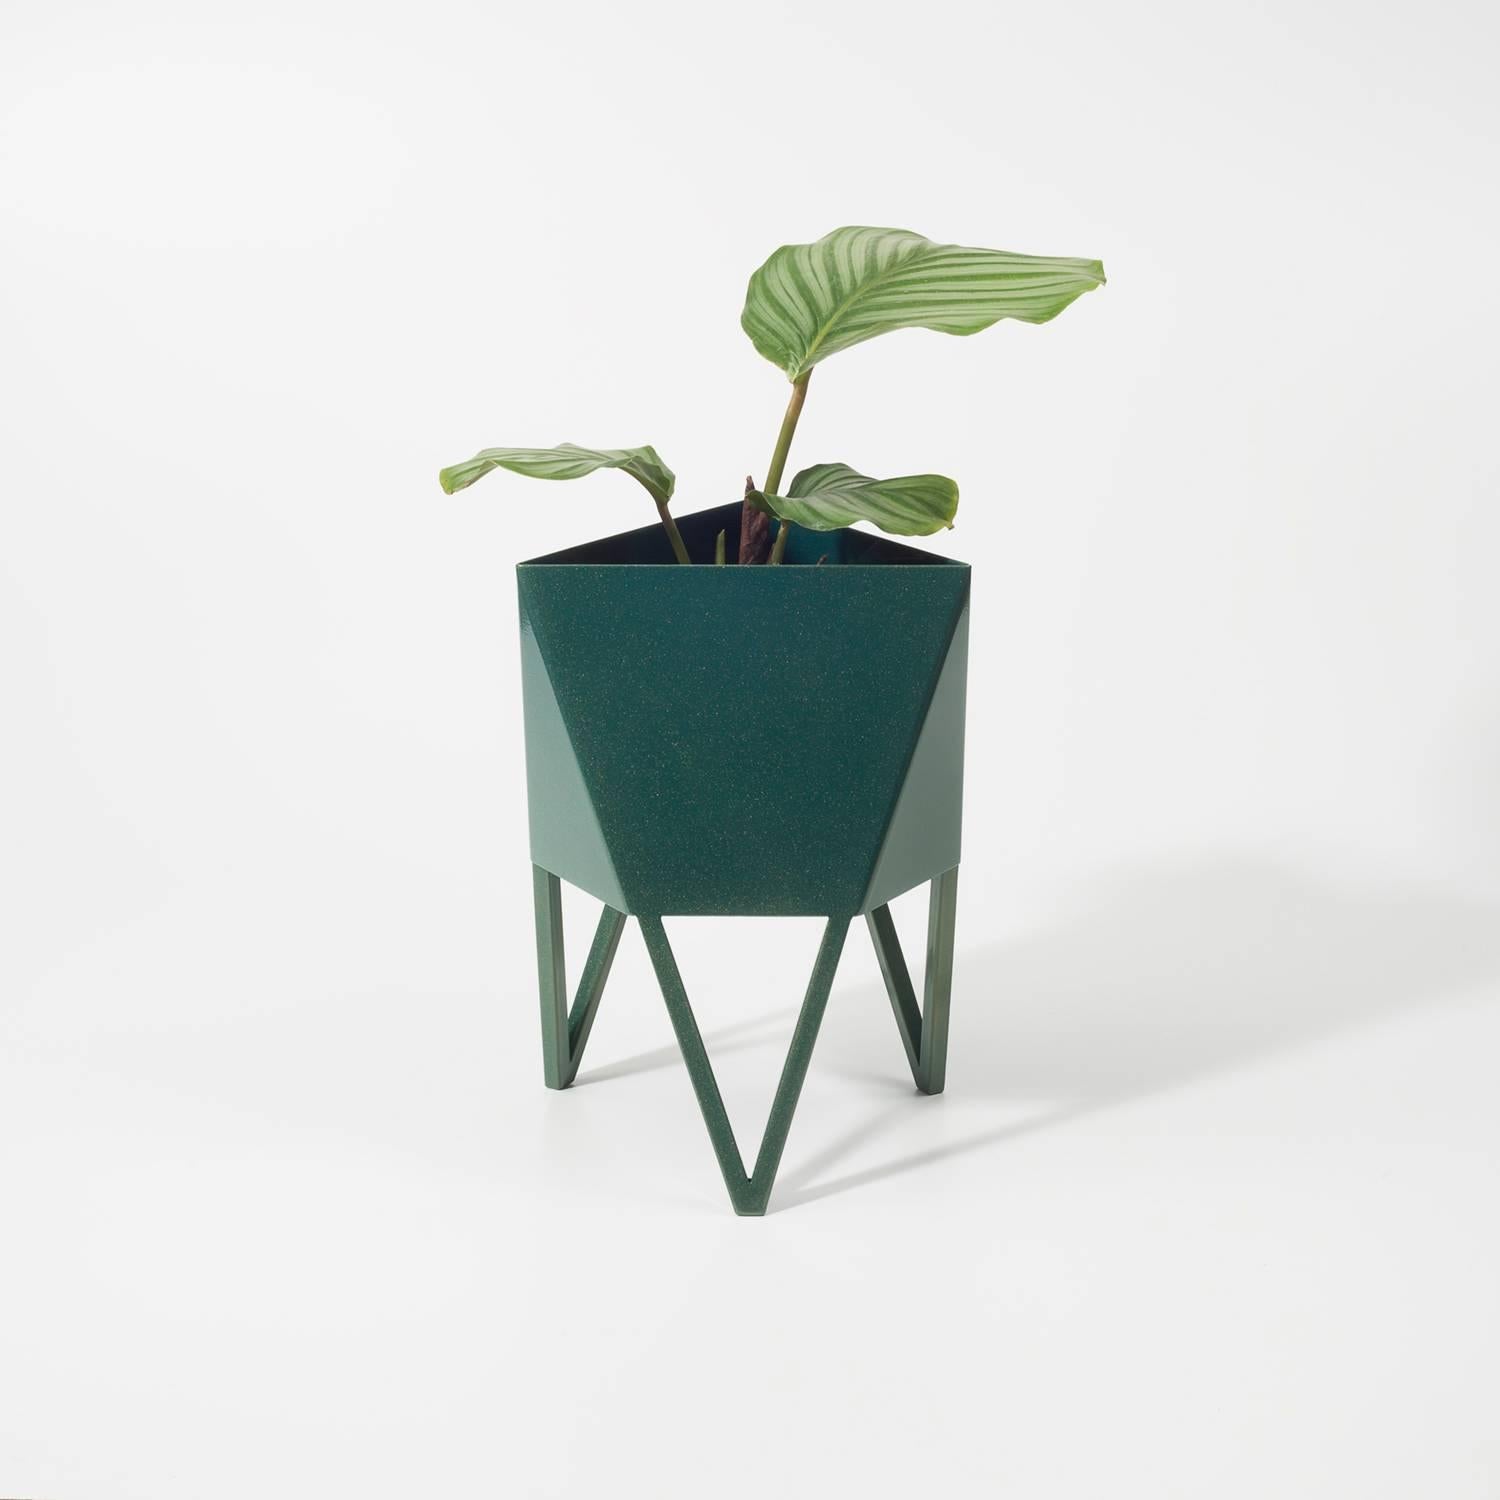 Introducing Force/Collide's award-winning signature planter, now in production with nine colors and four sizes. Using a seamless brake-forming technique, one sheet of steel is wrapped into a unique geometric pattern that's triangular at the top and